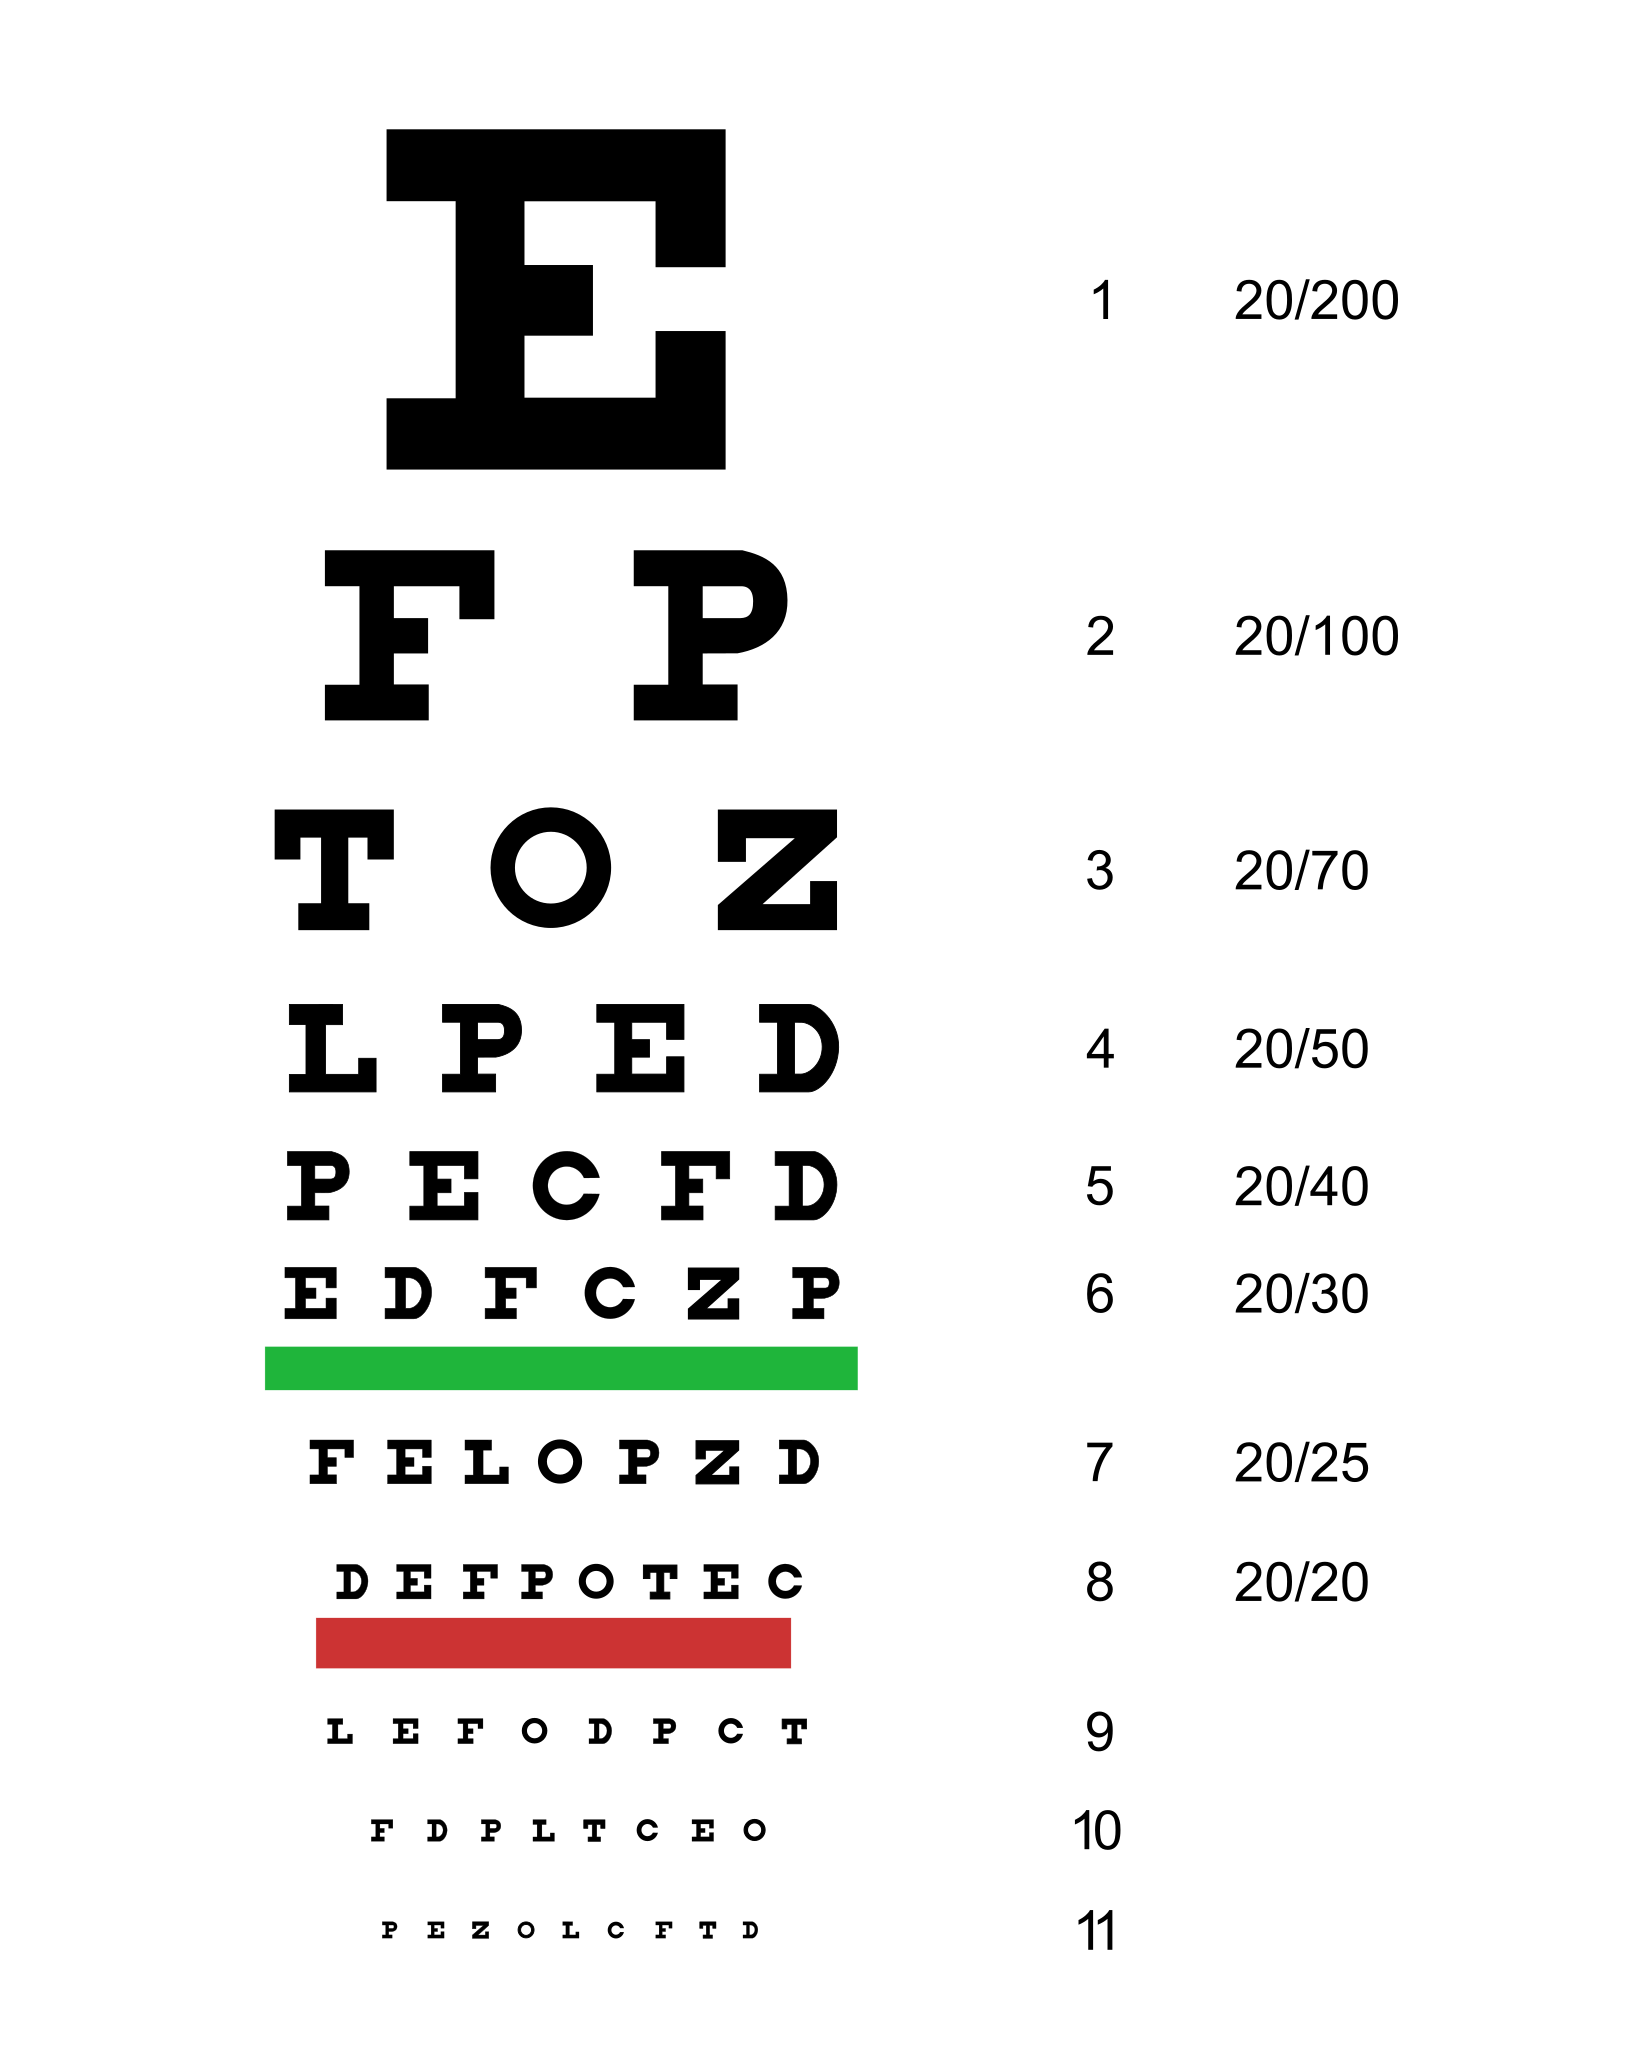 File:Snellen chart by Openclipart.svg - Wikimedia Commons